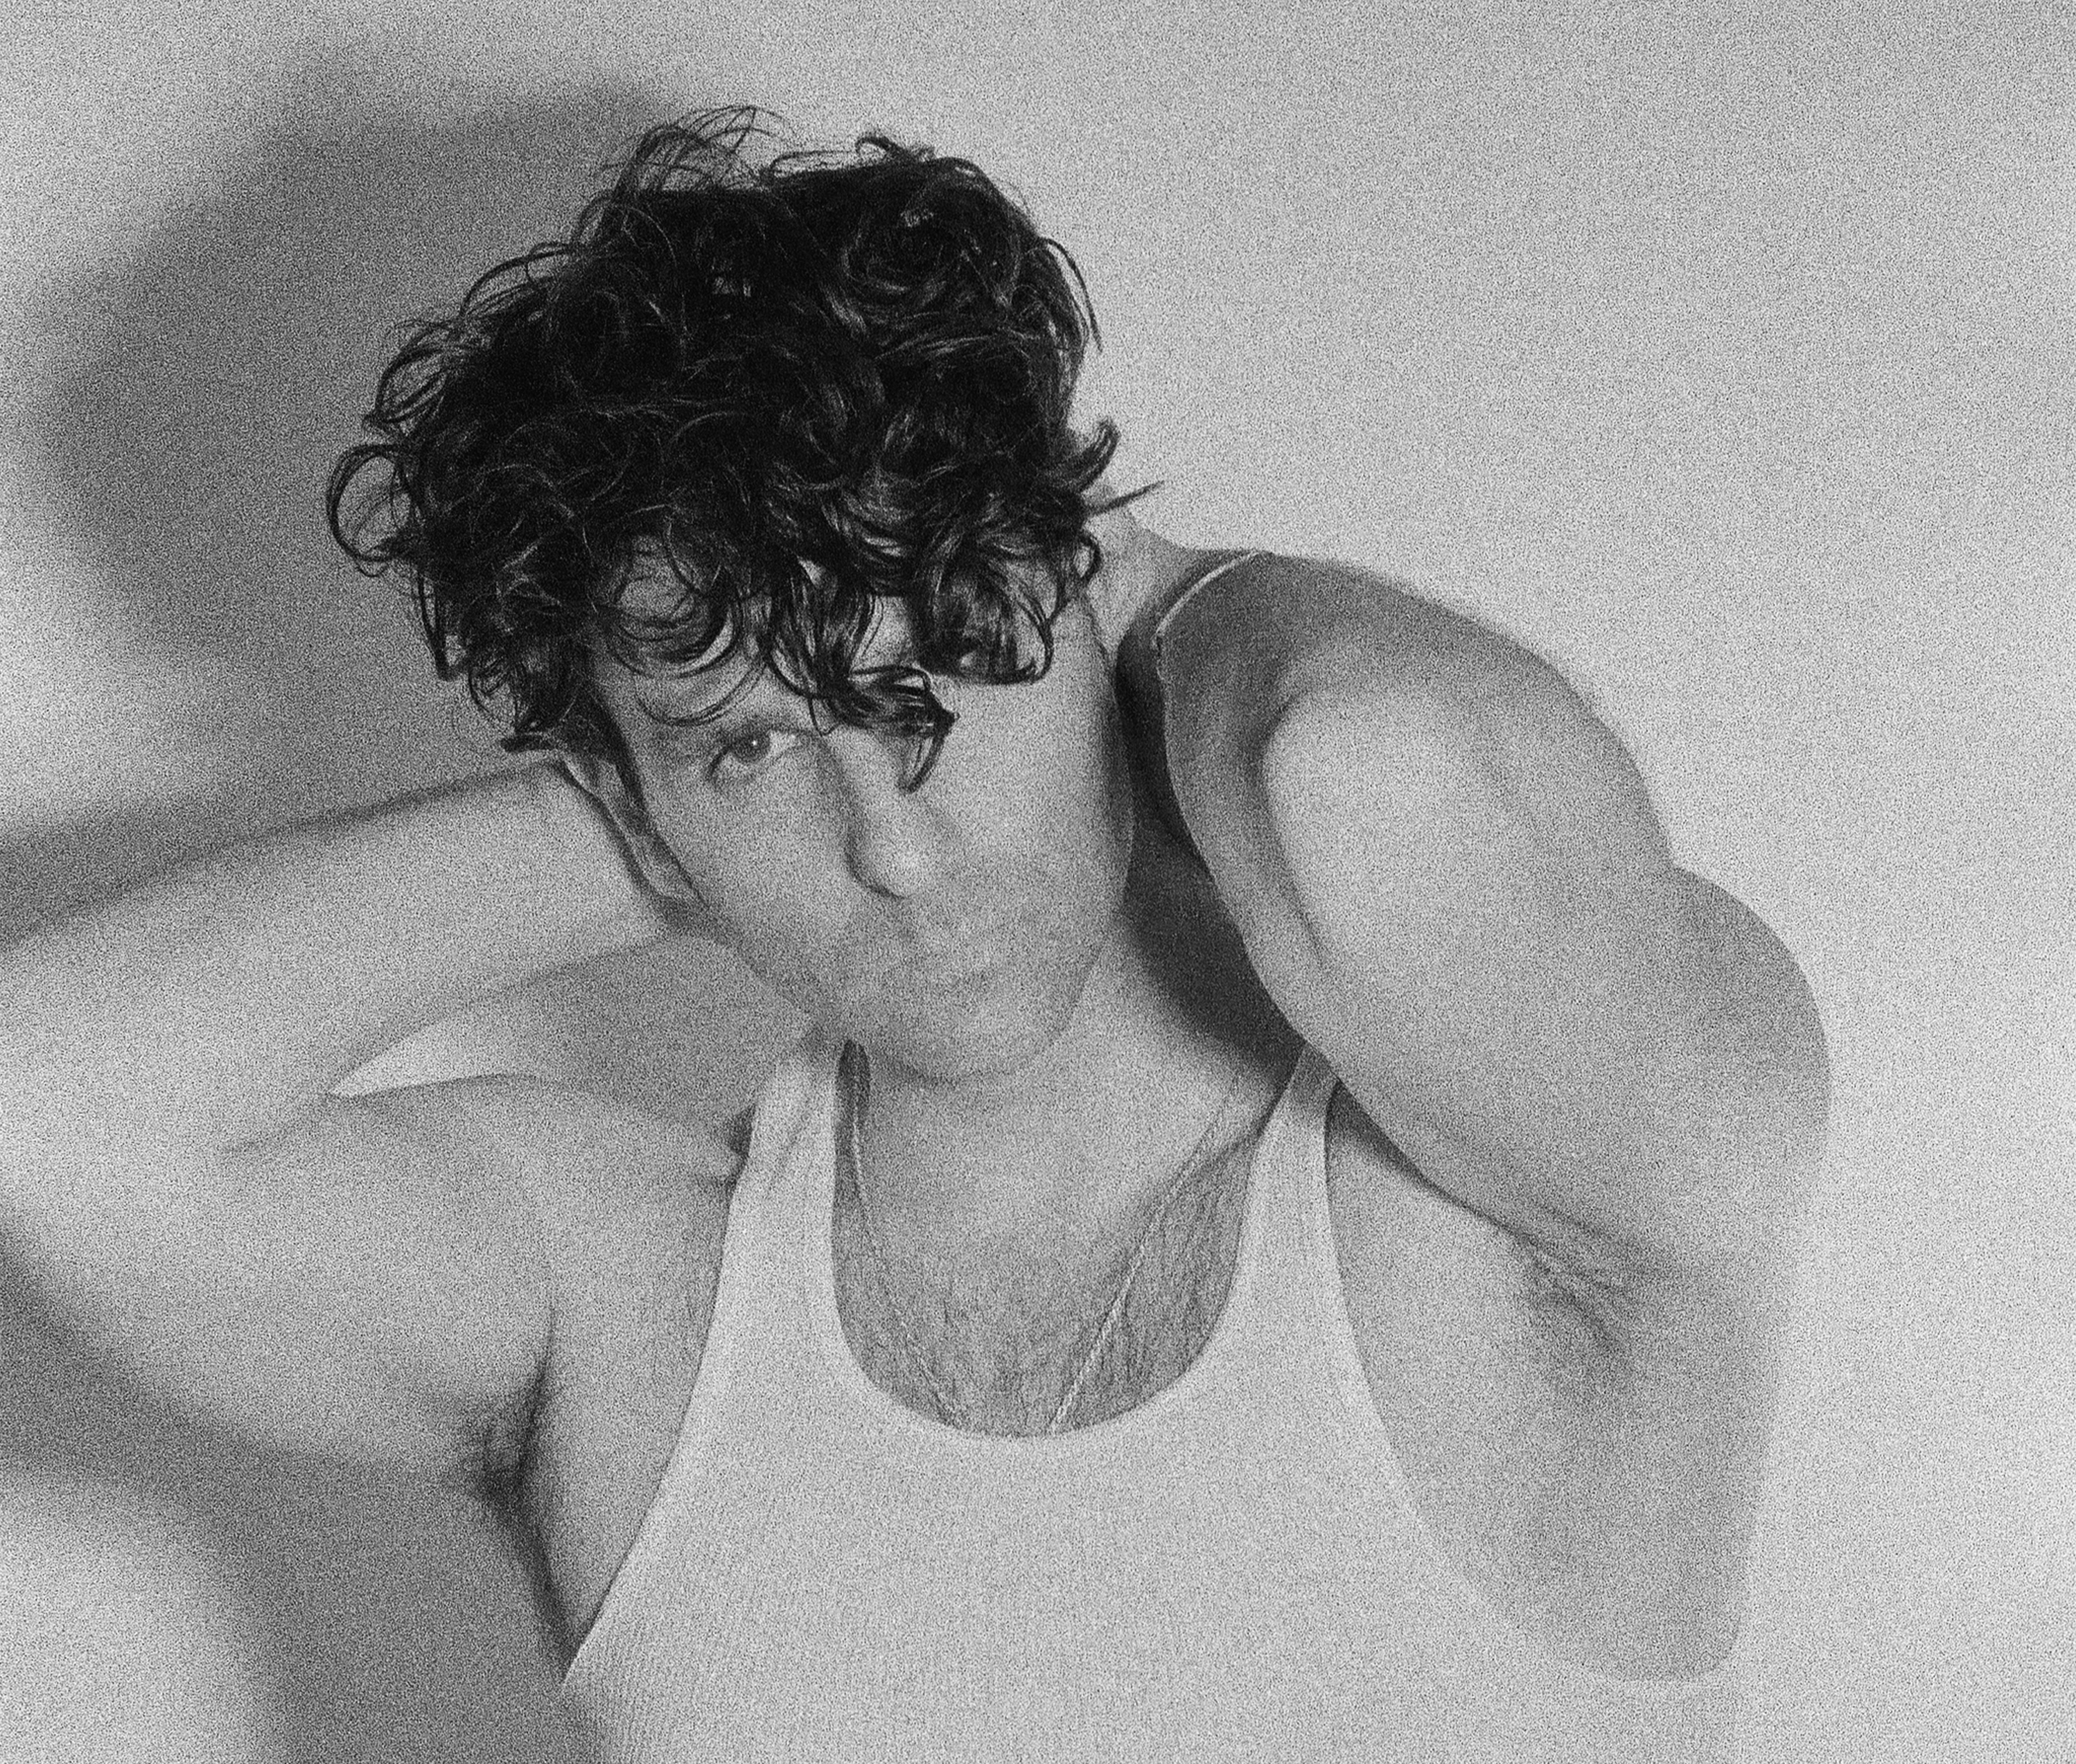 Low Cut Connie Reveals ‘Private Lives’, an Album Transformed by People from the Road